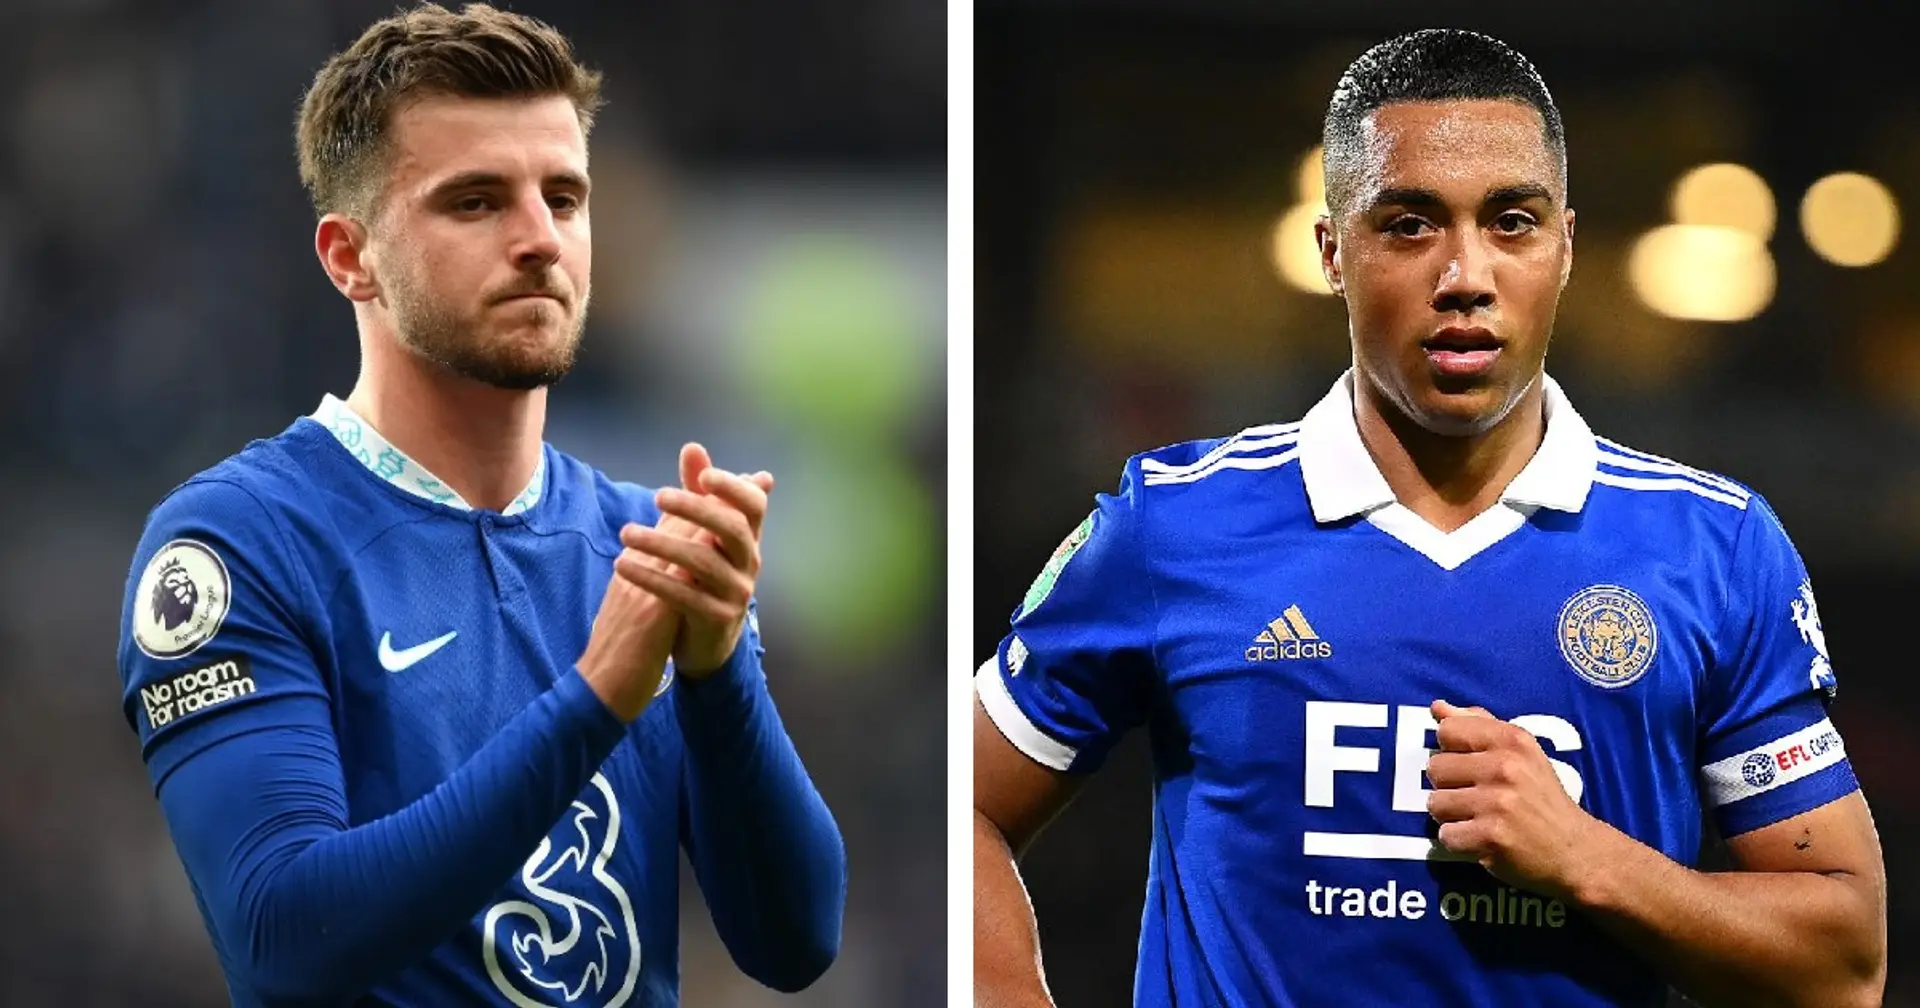 Tielemans or Mount - which one would you rather have at Liverpool?